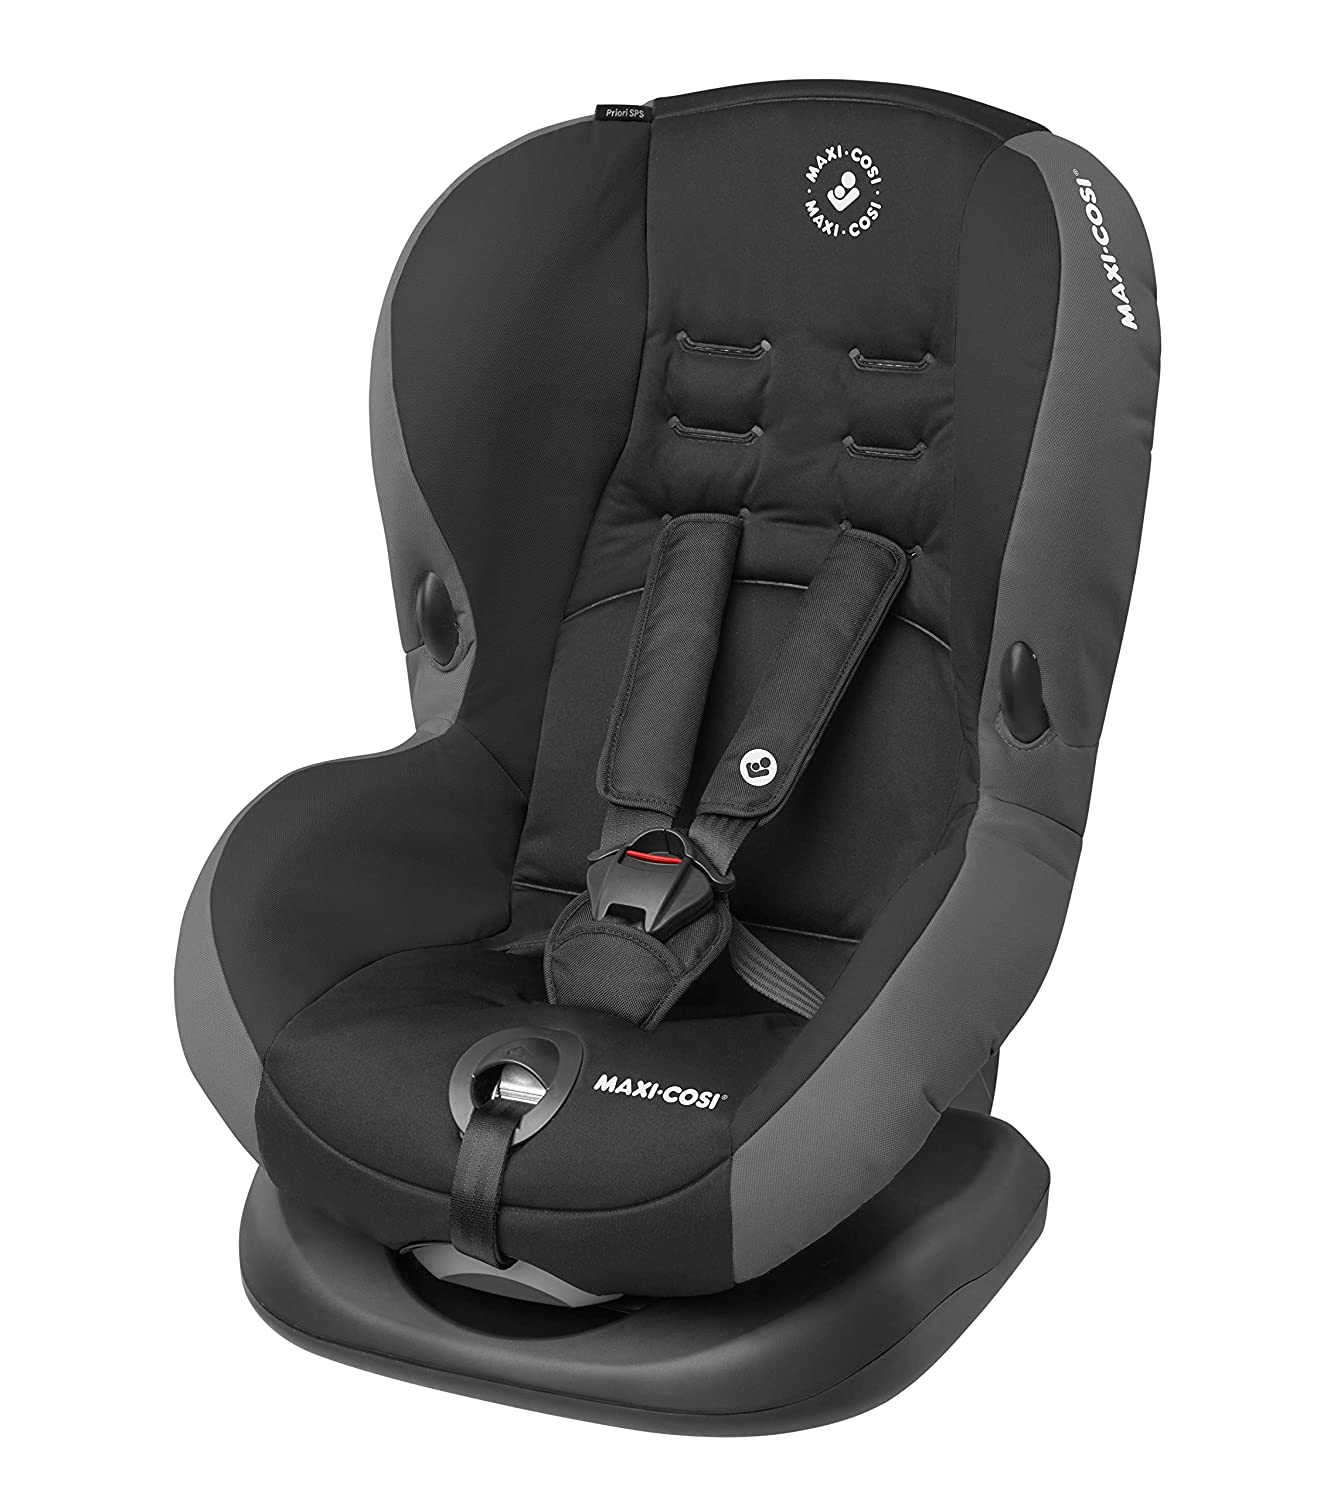 Maxi-Cosi Priori SPS Plus Child Seat - Optimum Side Impact Protection and 4 Seat and Resting Positions Group 1 (9-18 kg) with Headrest Carbon Black